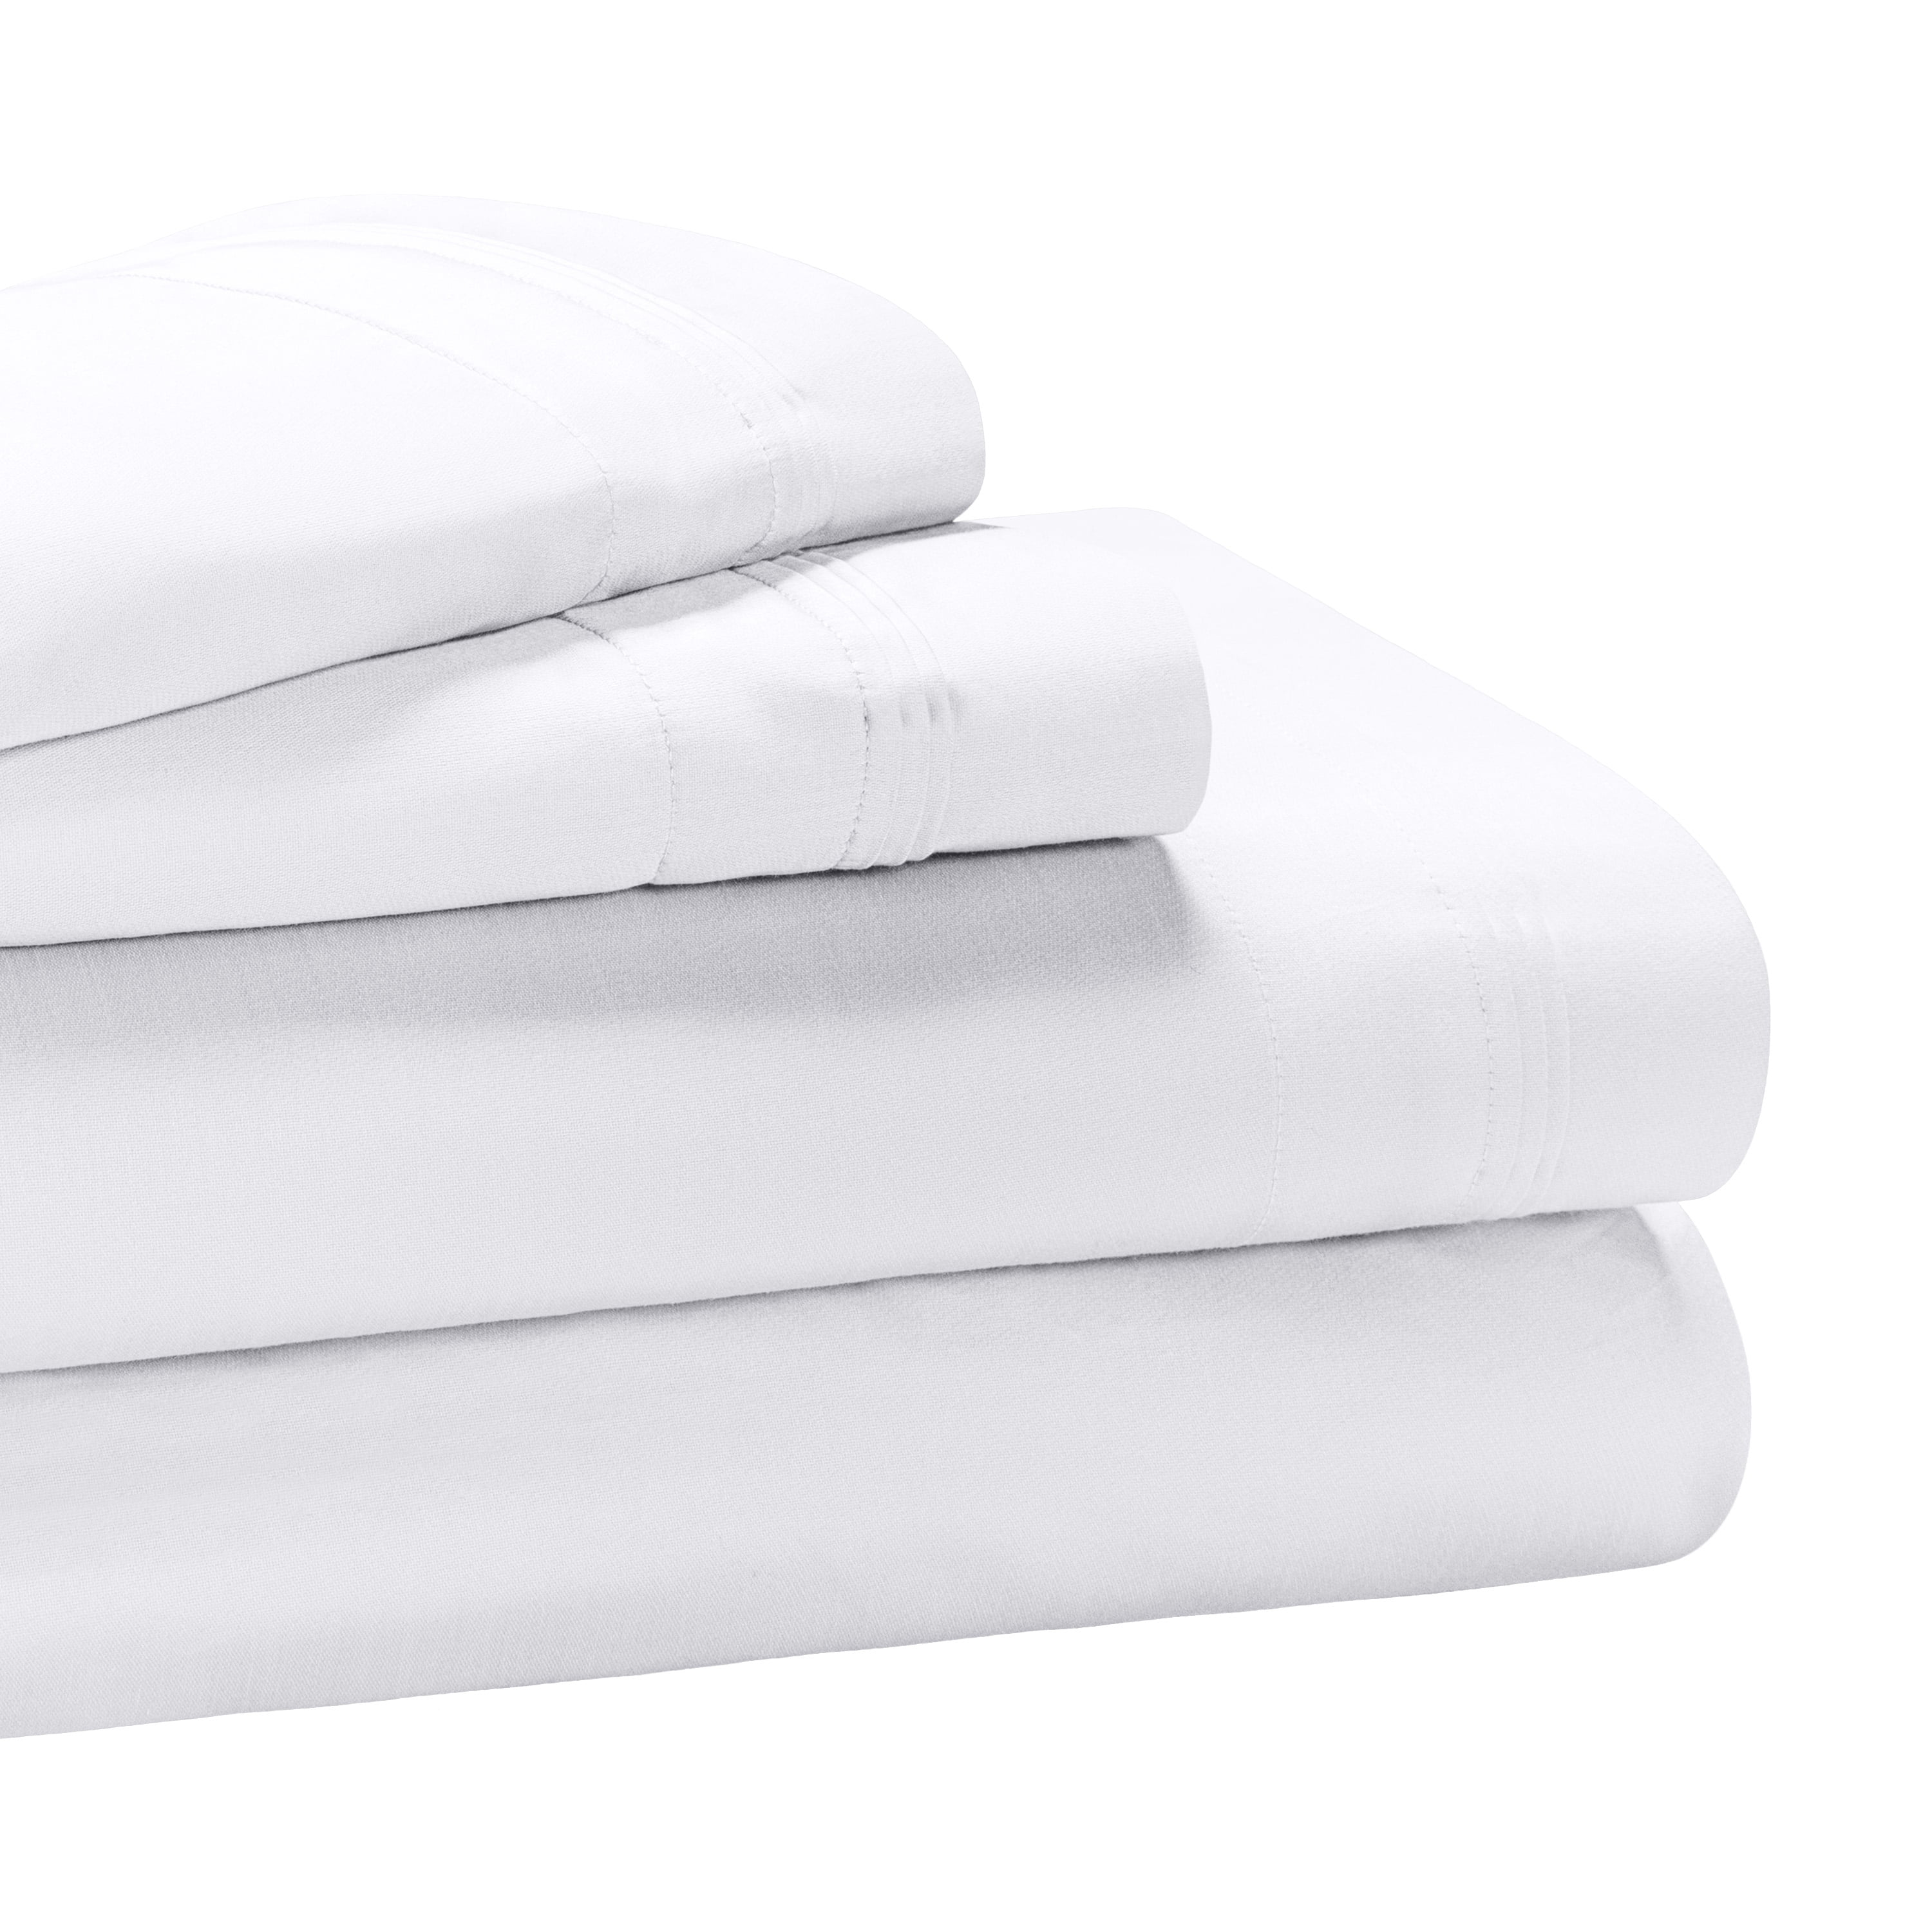 HOTEL PREMIER COLLECTION 650 TC EGYPTIAN COTTON SHEET SET*CHECK FOR COLOR & SIZE 